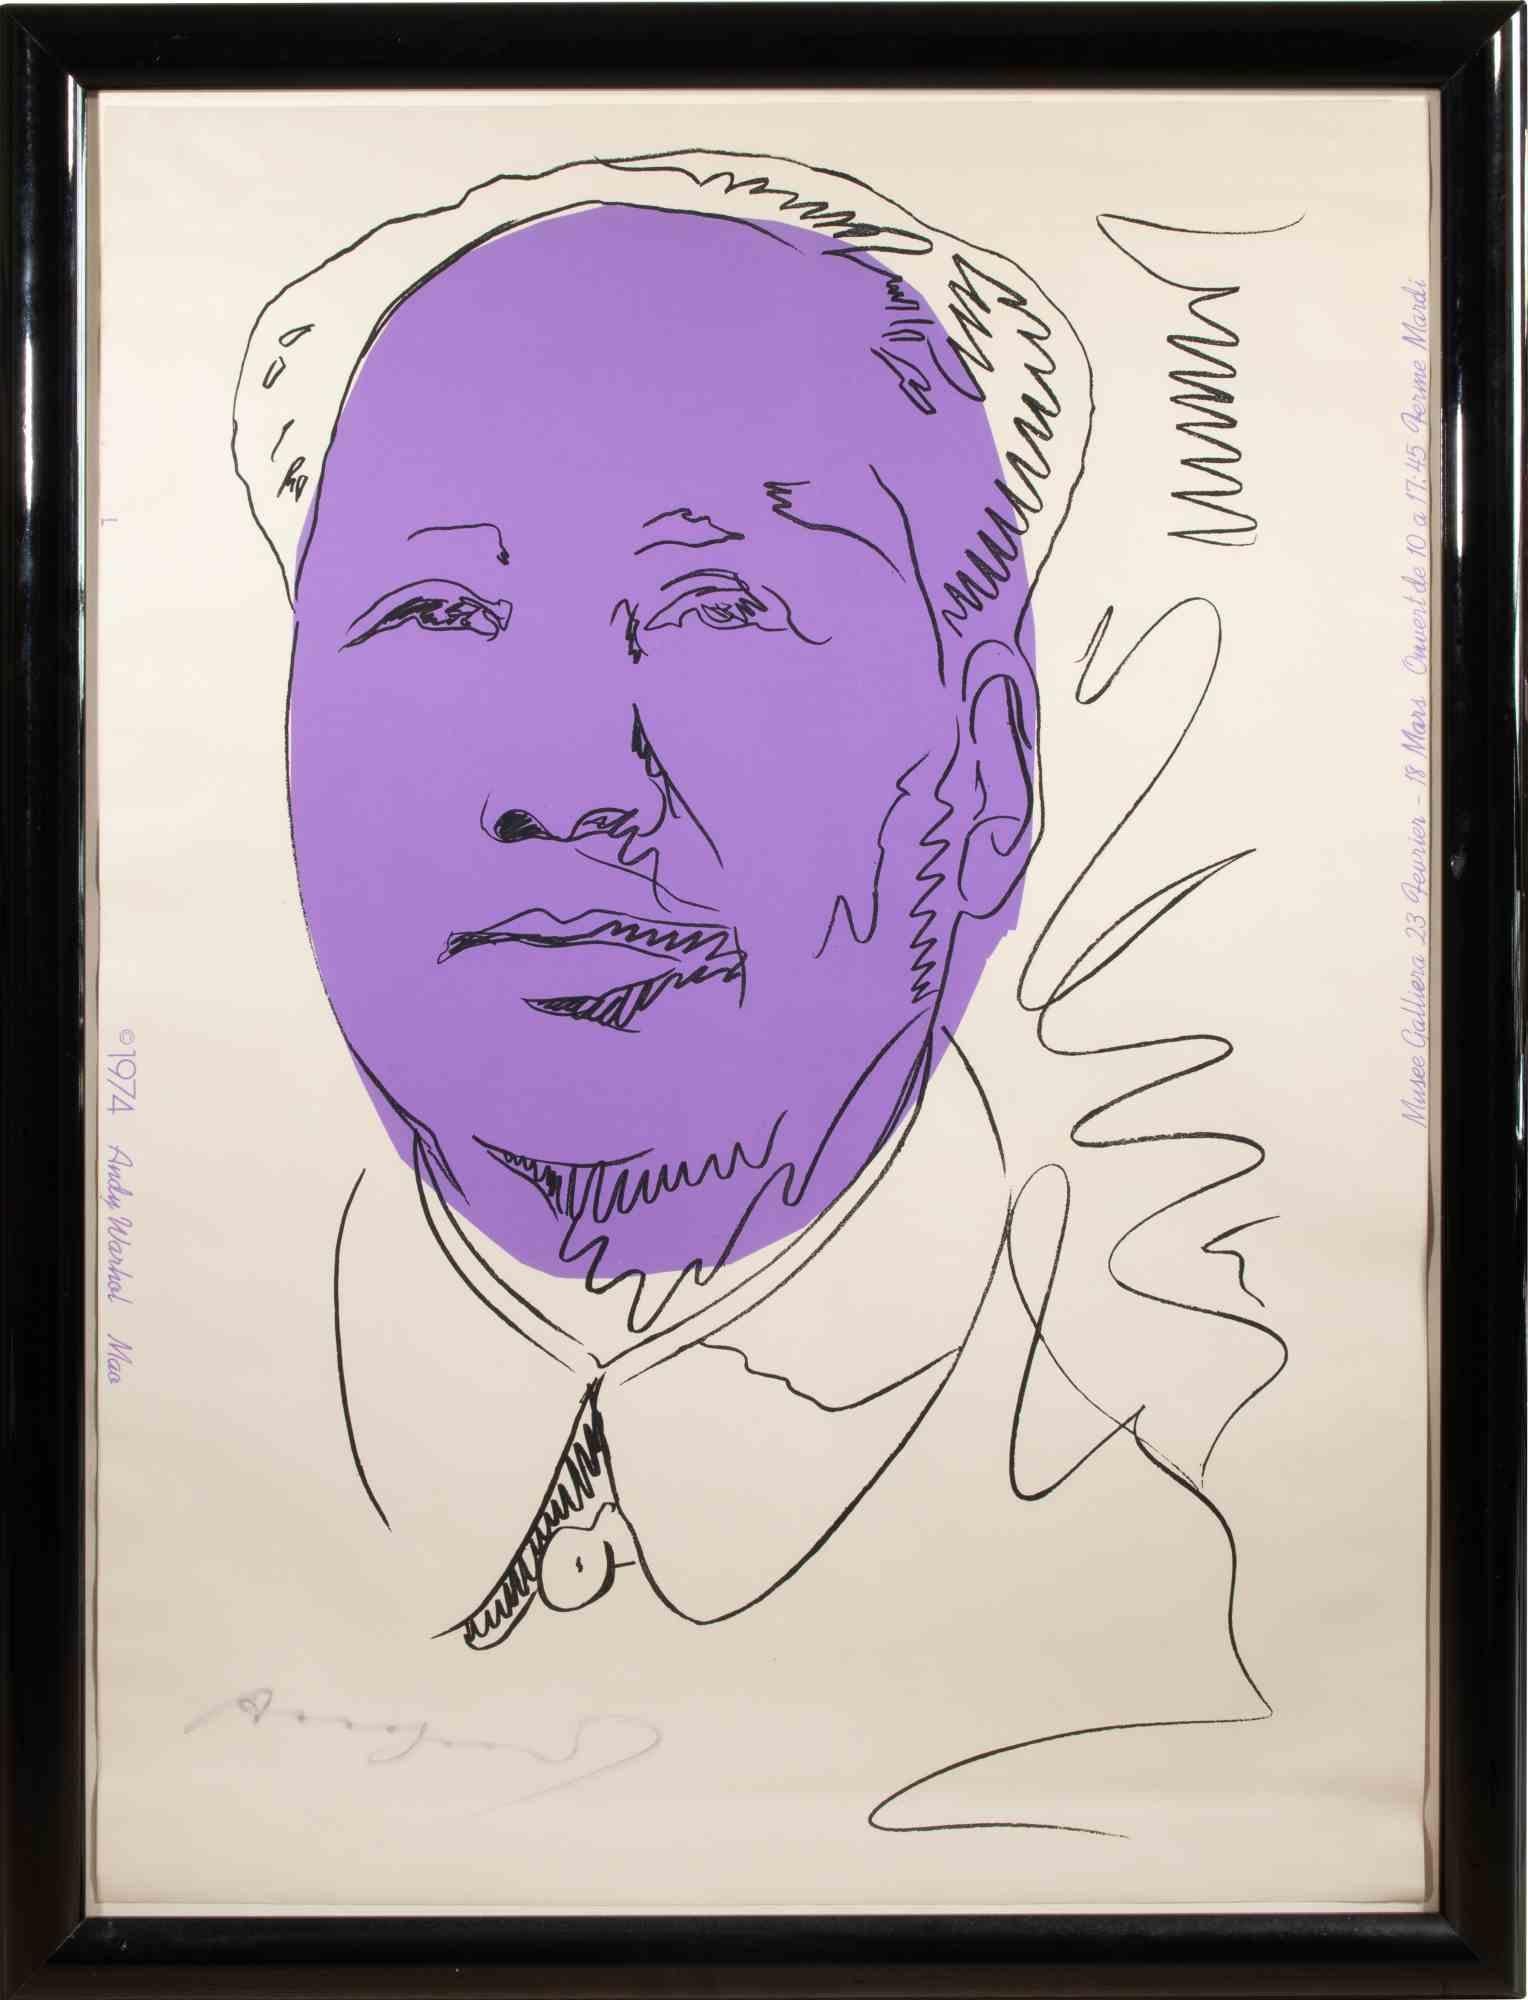 Mao is a contemporary artwork realized by Andy Warhol in 1974.

Colour screenprint on wallpaper.

Includes frame: 113 x 86 x 3 cm

Hand signed by lower left.

Prov. Galerie Vayhinger, Radolfzell (frame back with adhesive label).

Published on the